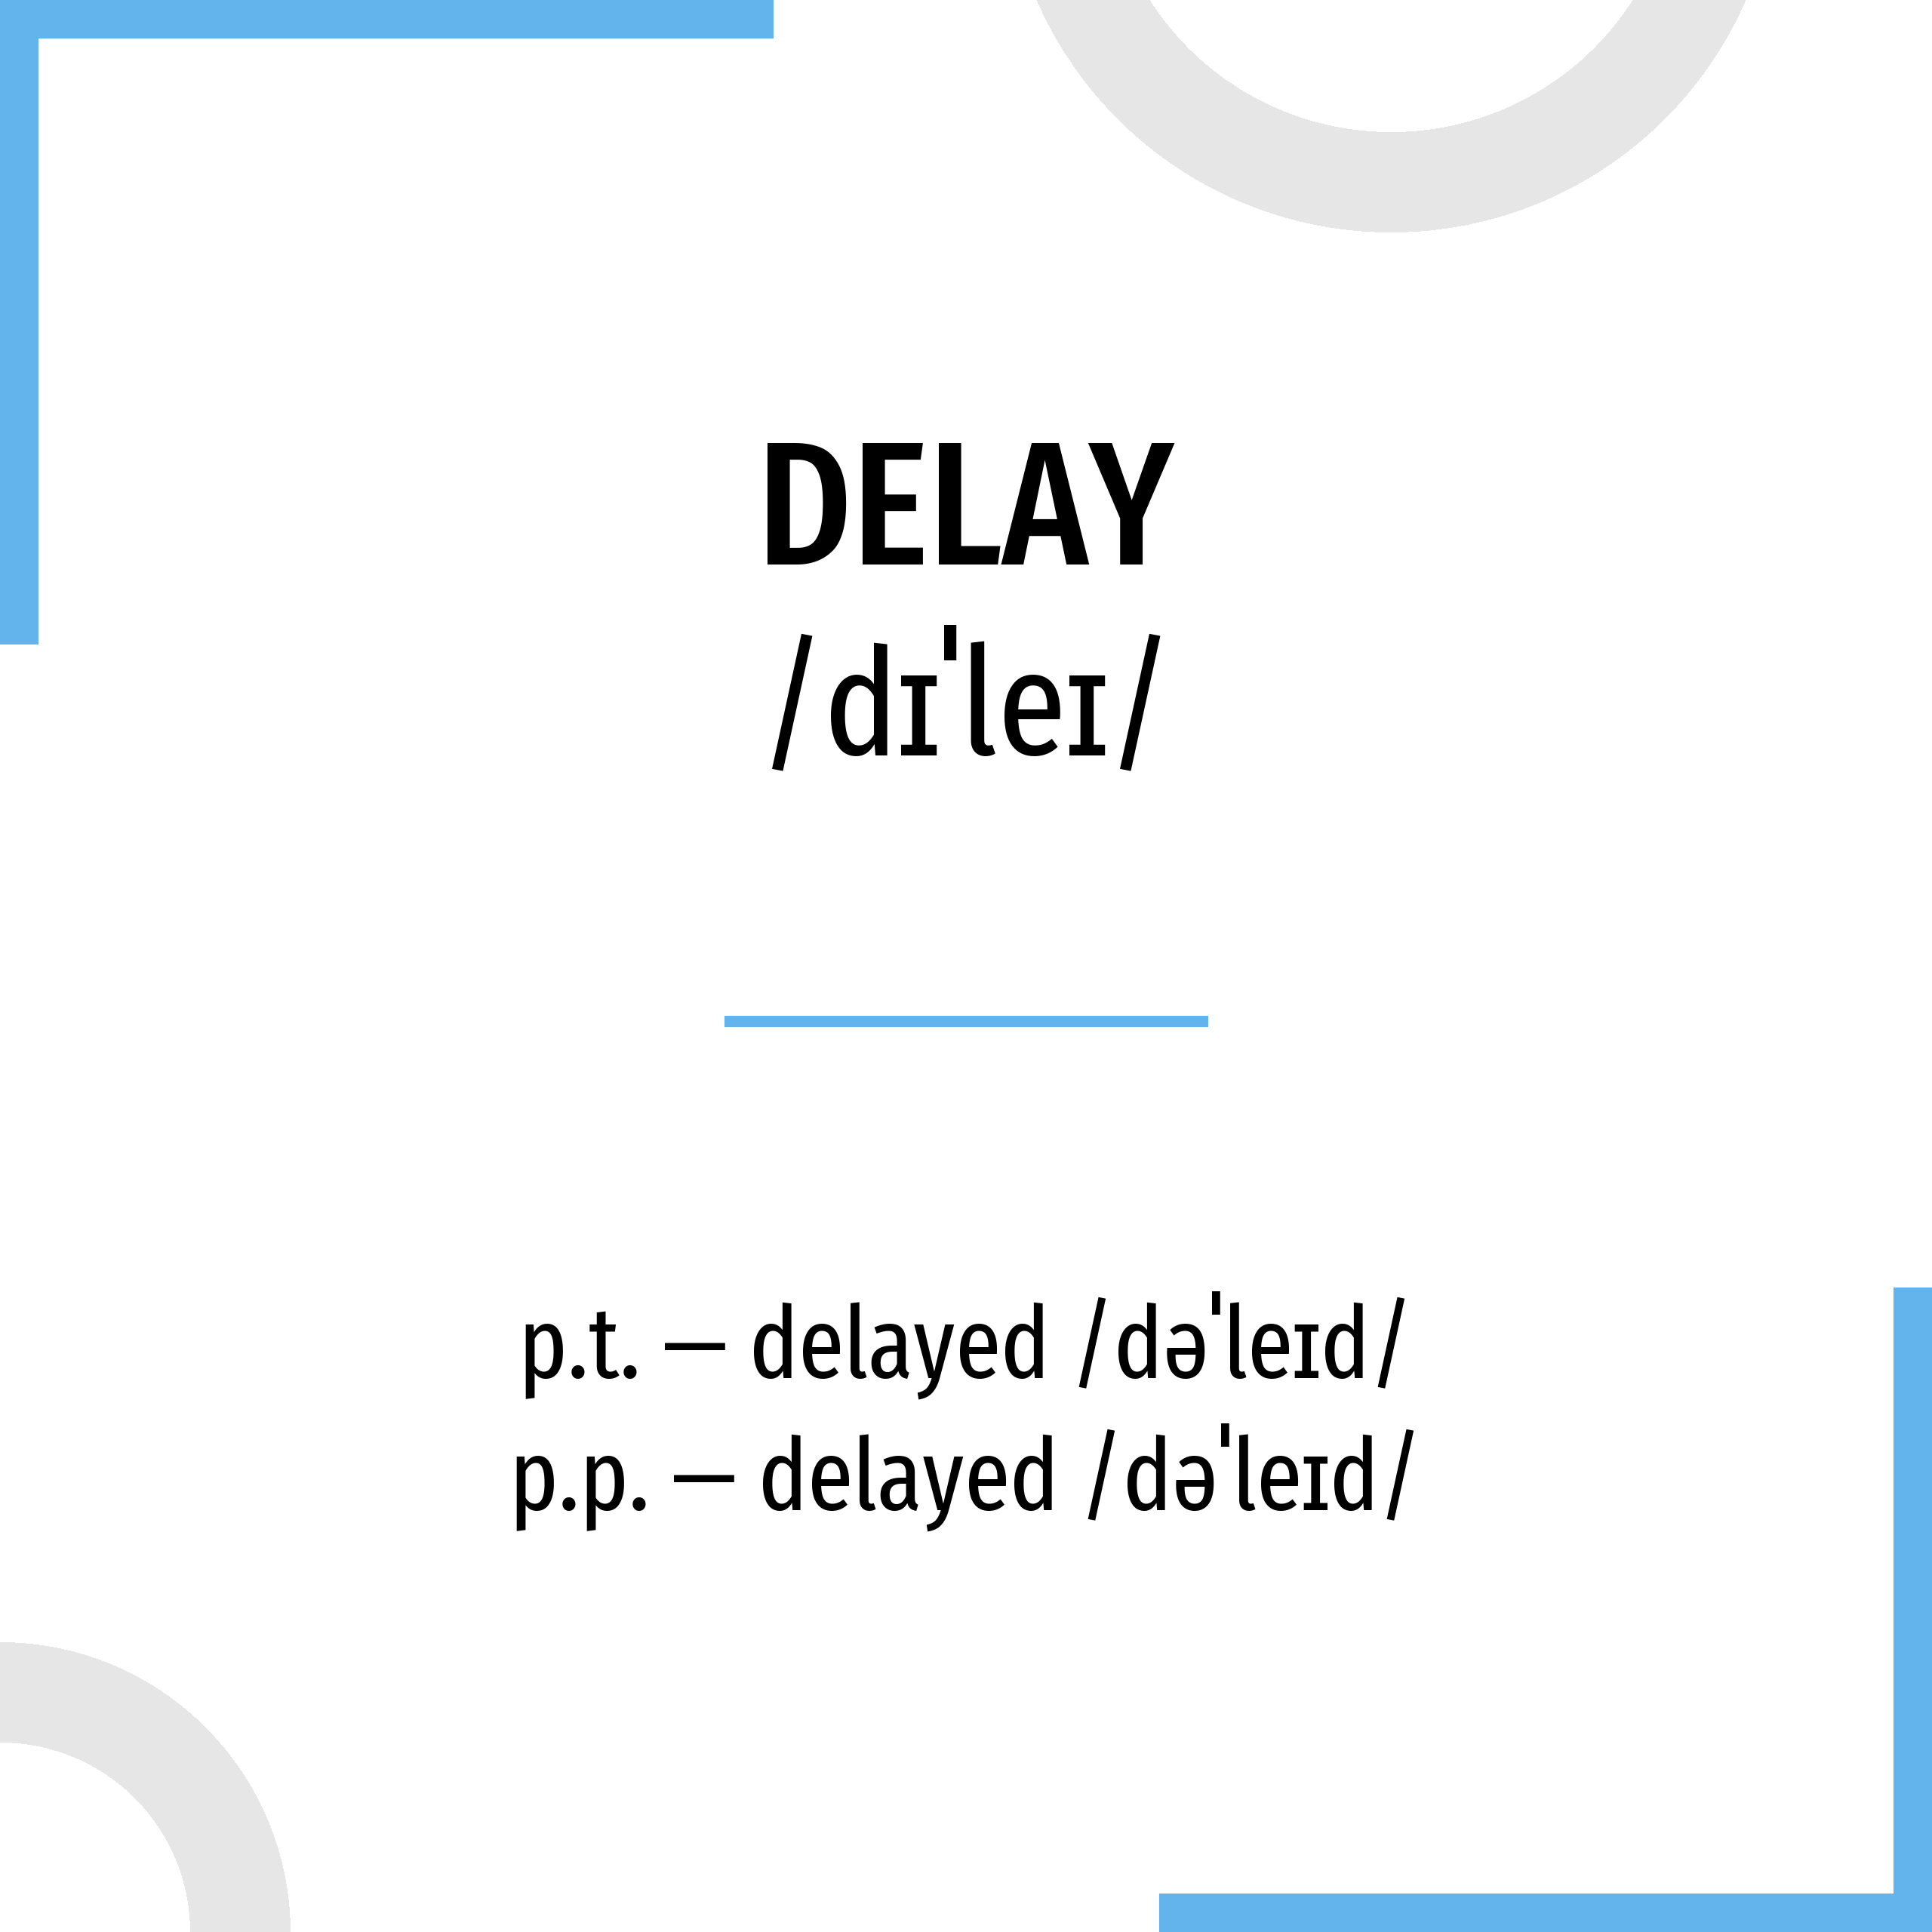 DELAY - Meaning and Pronunciation 